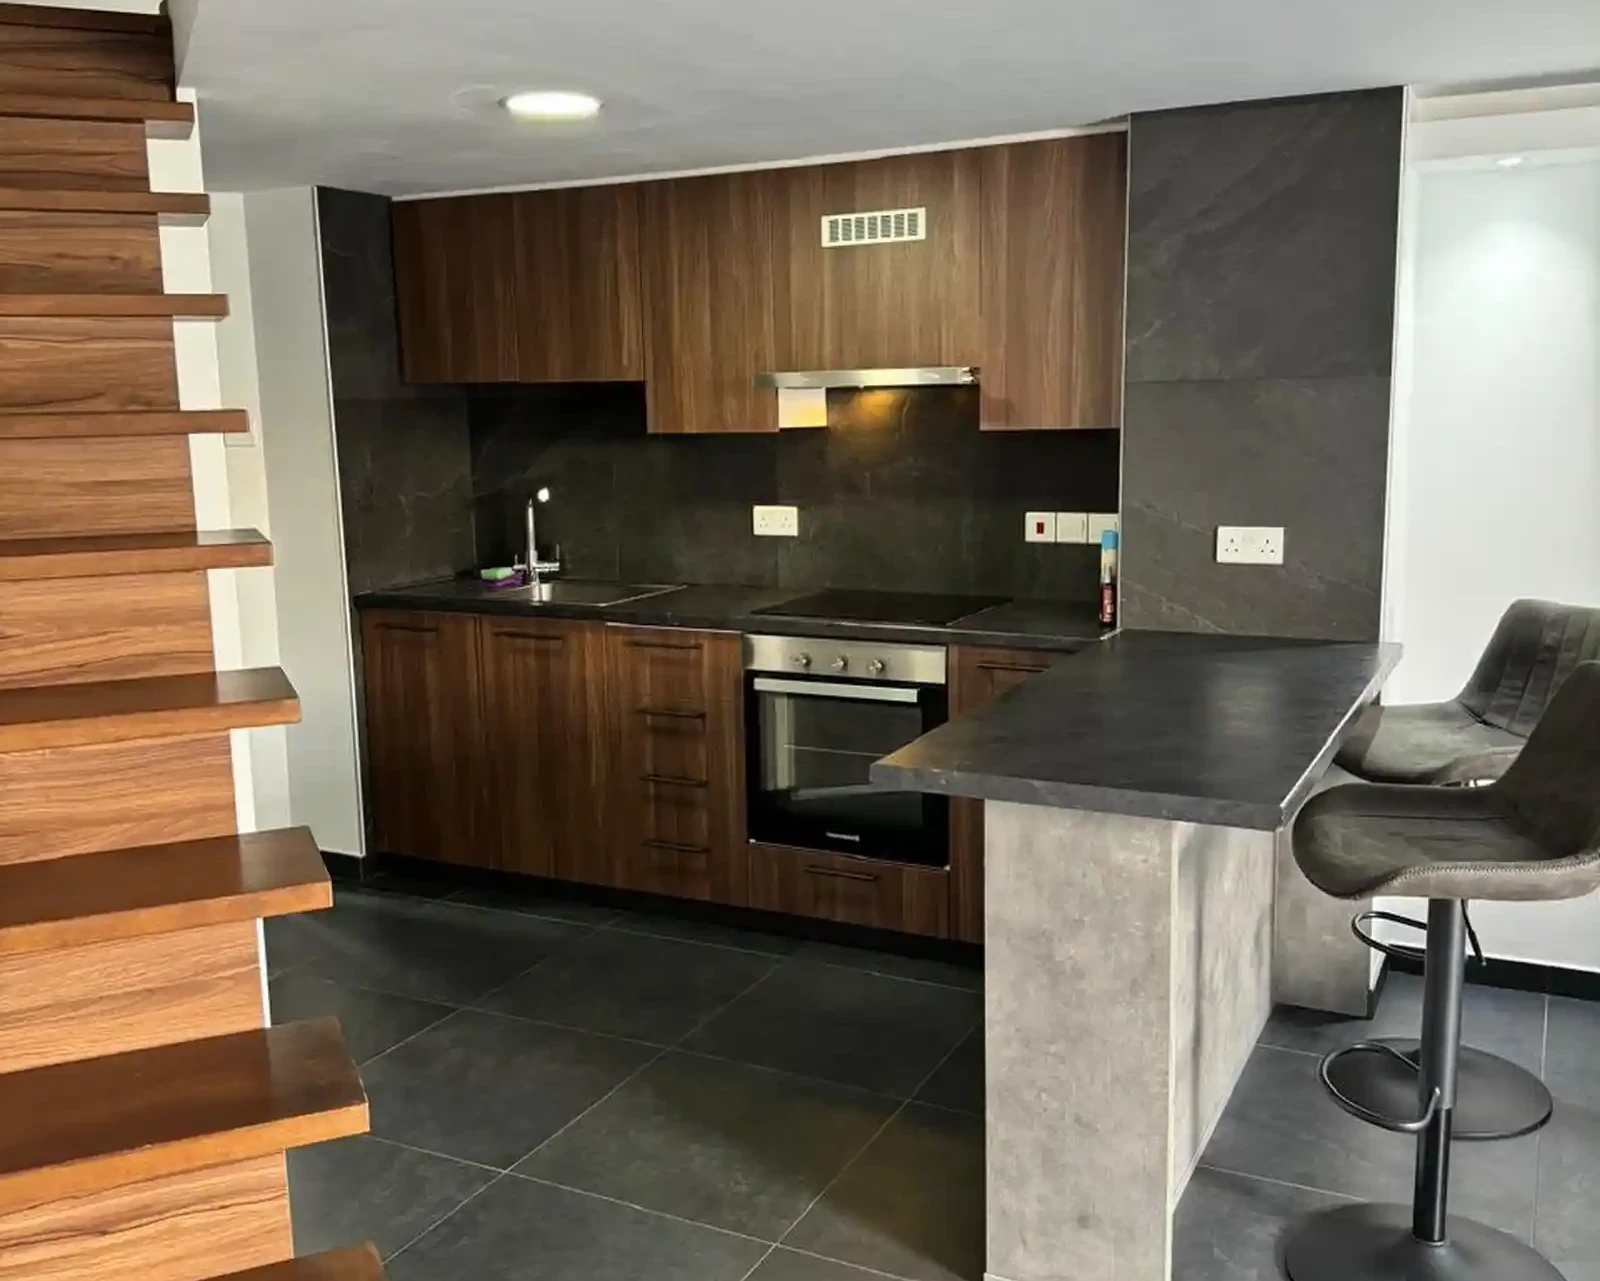 1-bedroom apartment to rent €1.200, image 1